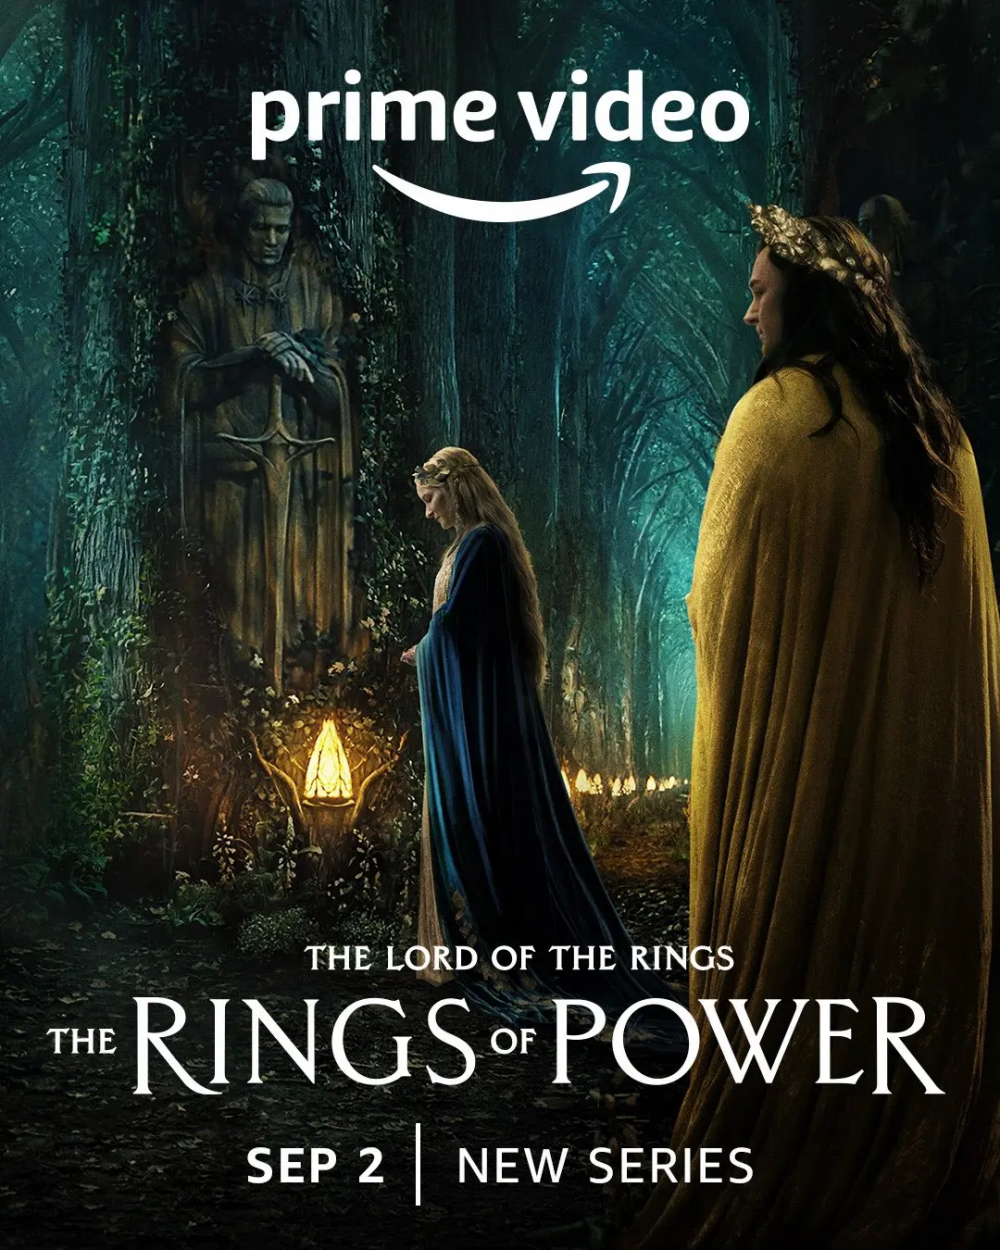 harper bazaar review the lord of the rings the rings of power 2 e1662283735938 - Review phim The Lord of the Rings: The Rings of Power